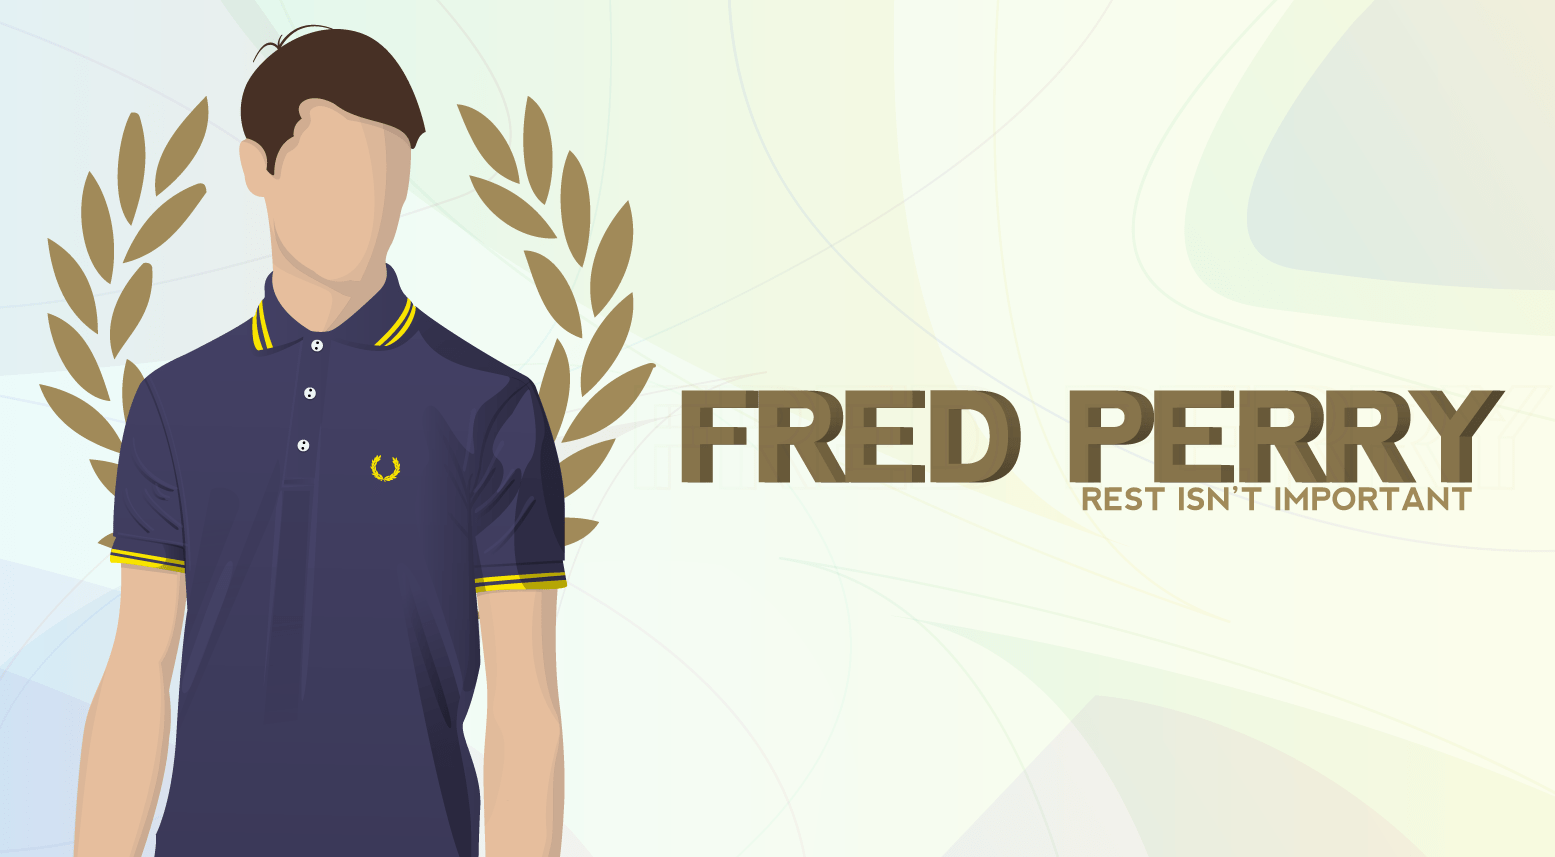 Teil Zwei - Frederick "Fred" Perry Sapeur - One Step Beyond.